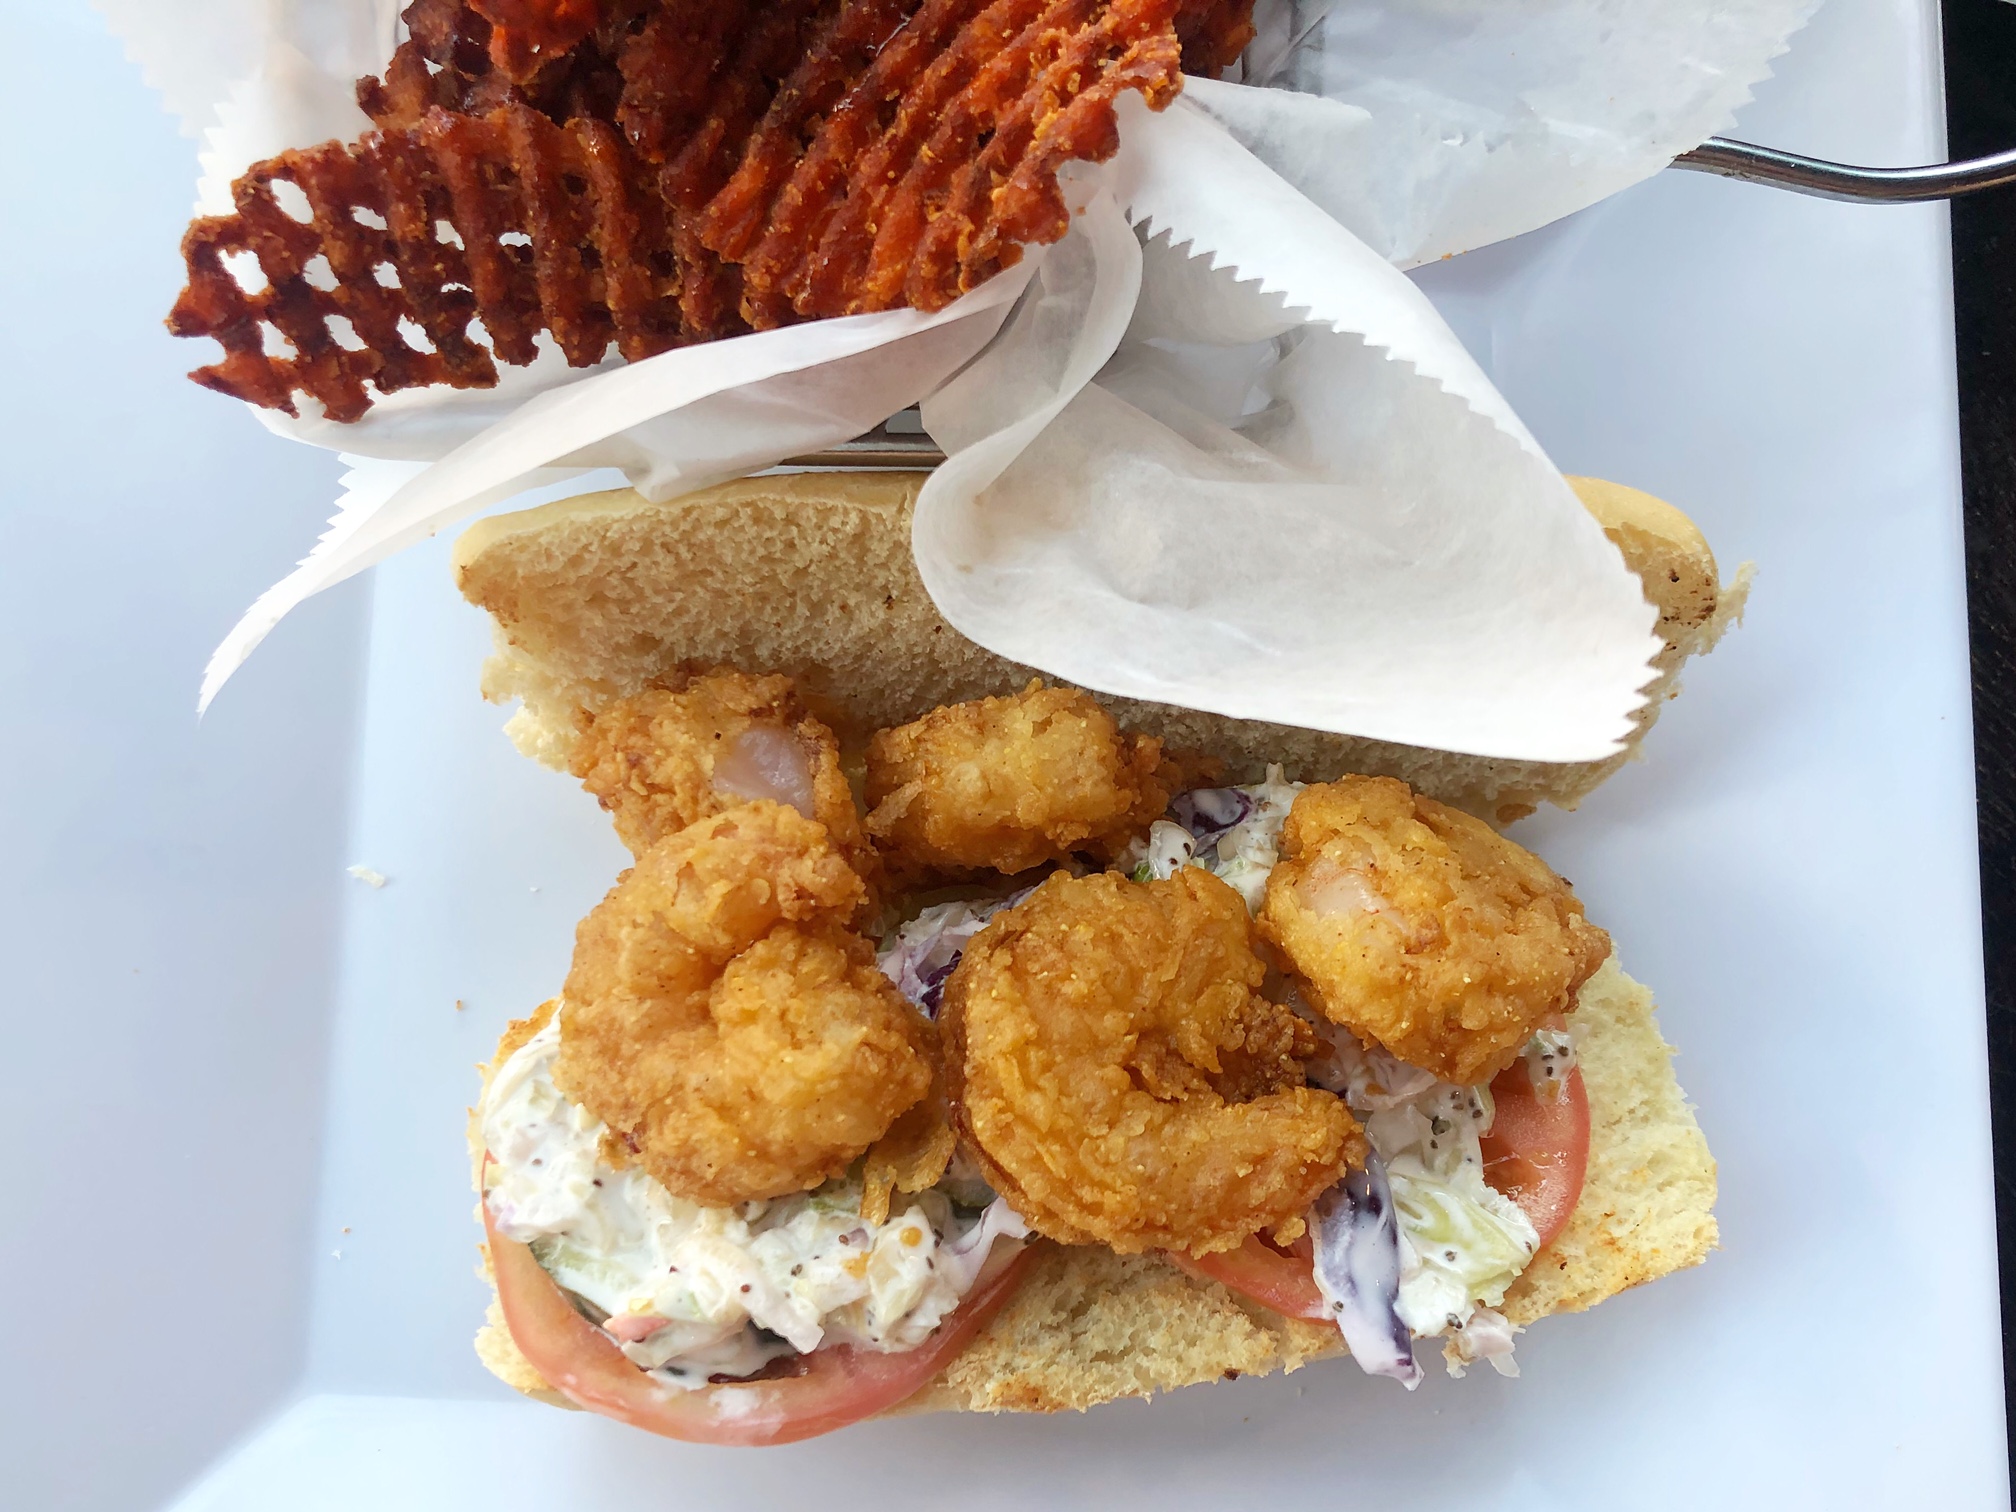 An overhead photo of a po boy from Neil St. Blues shows a several fried shrimp atop coleslaw on a white bun on a white plate. Photo by Alyssa Buckley.